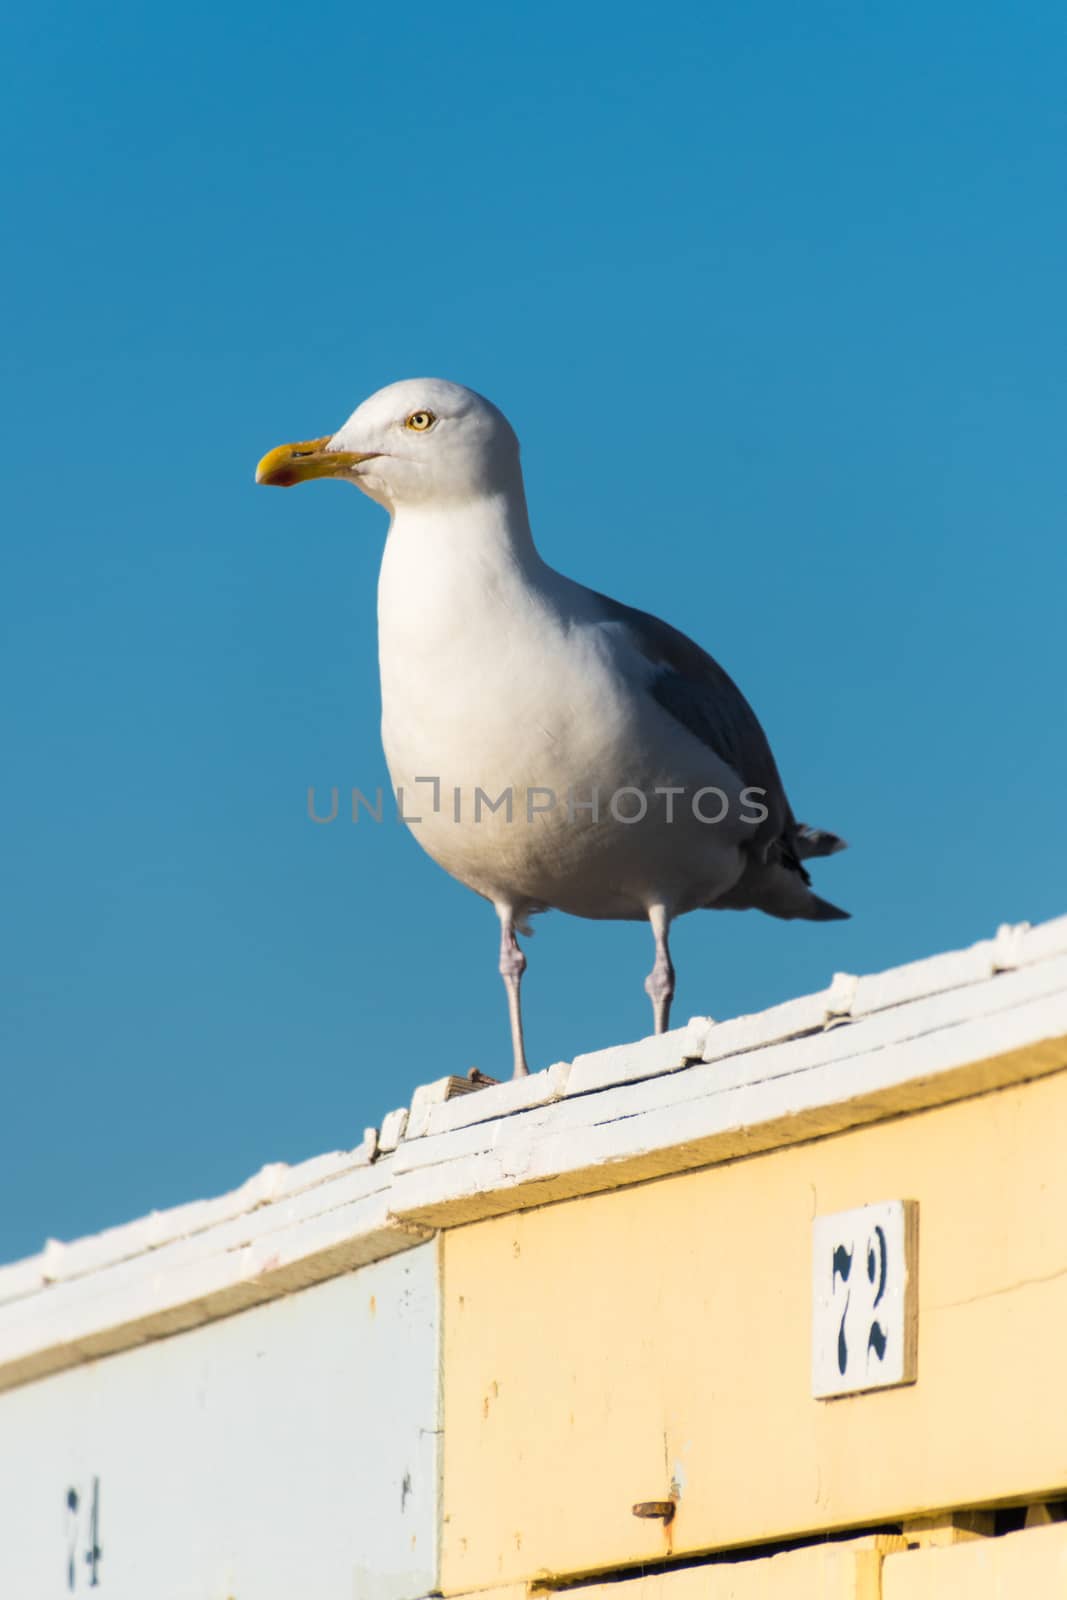 Seagull sitting on beach sheds in sunset by MXW_Stock